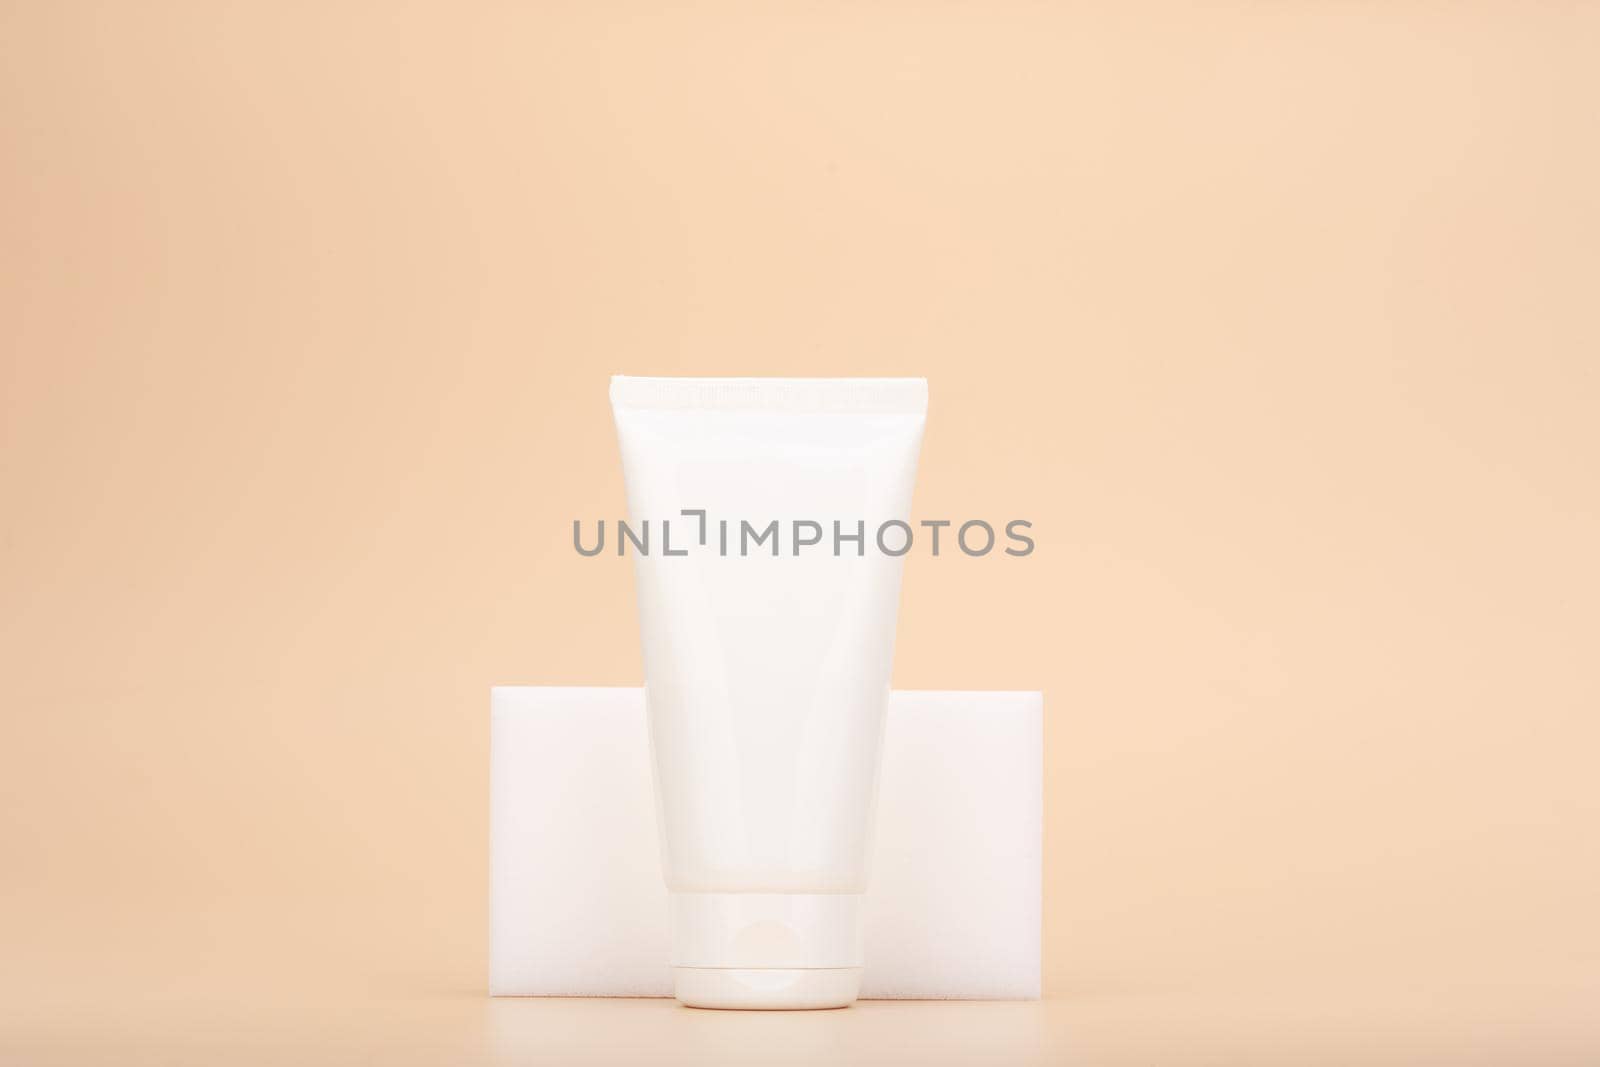 Hands or face cream in white glossy tube against light beige background. Concept of organic moisturizing beauty products for face, neck or hands